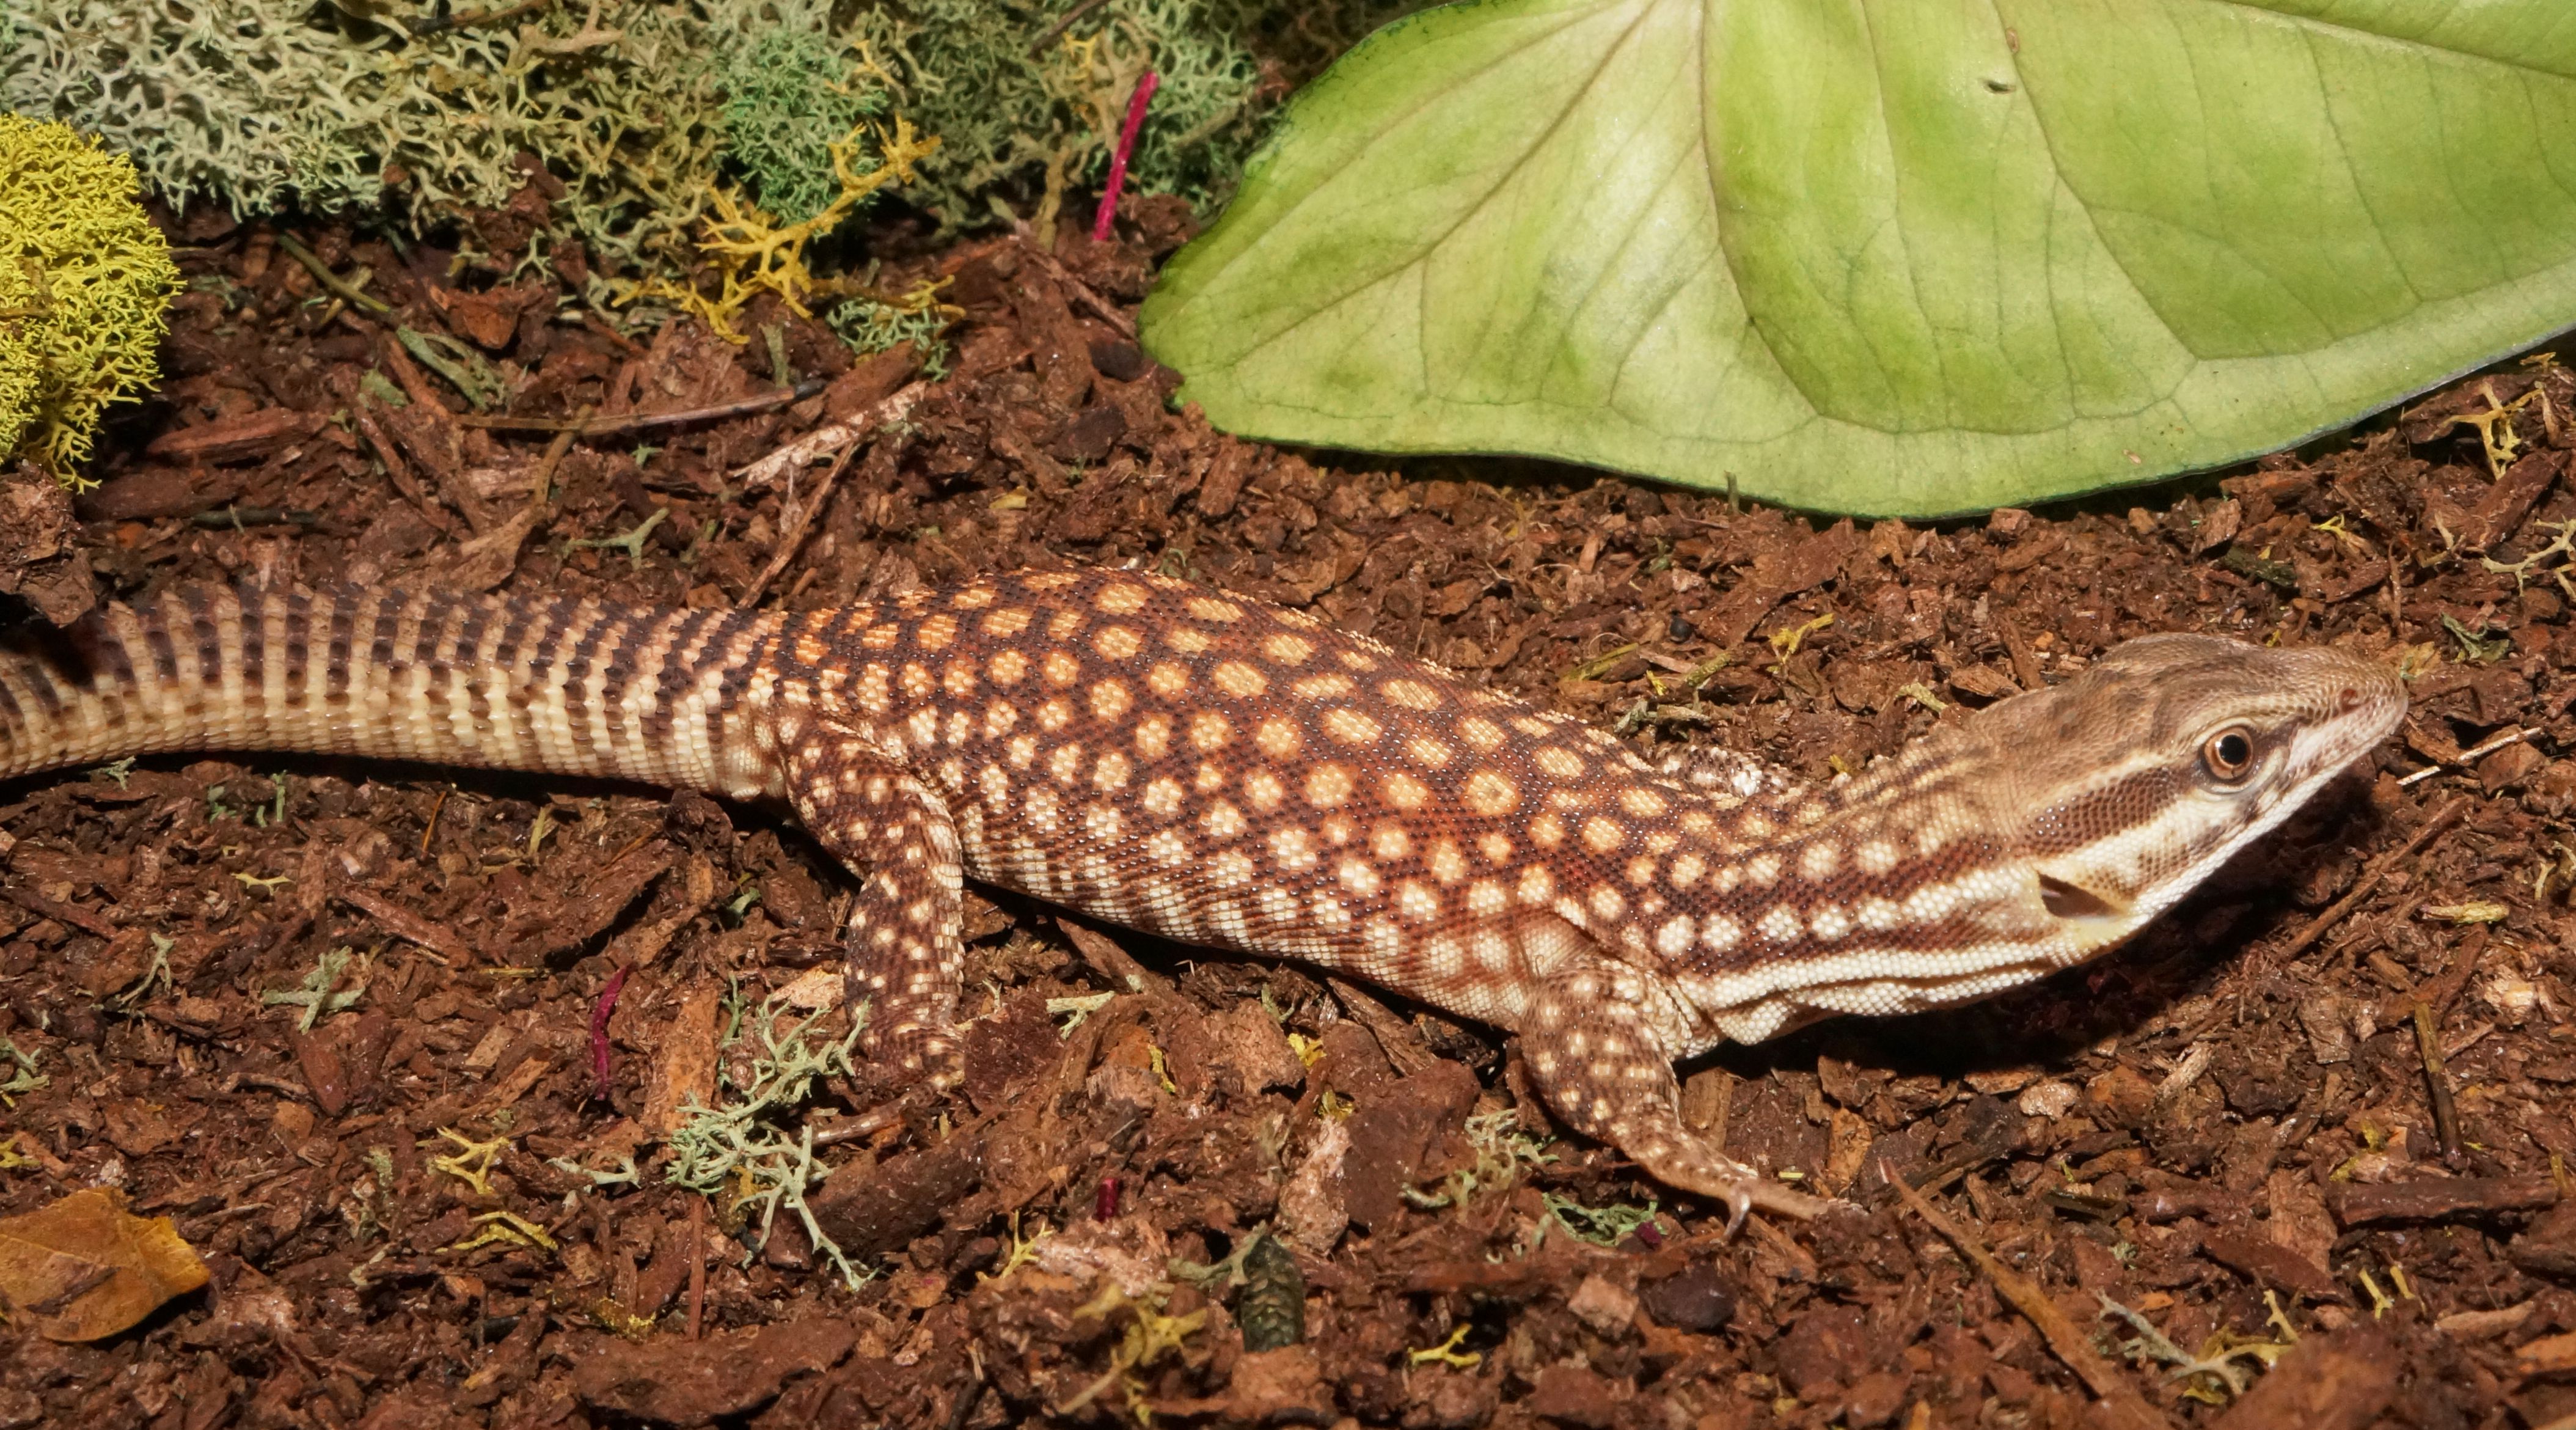 Baby Red Ackie Monitor. Lizards: Monitors & Tegus